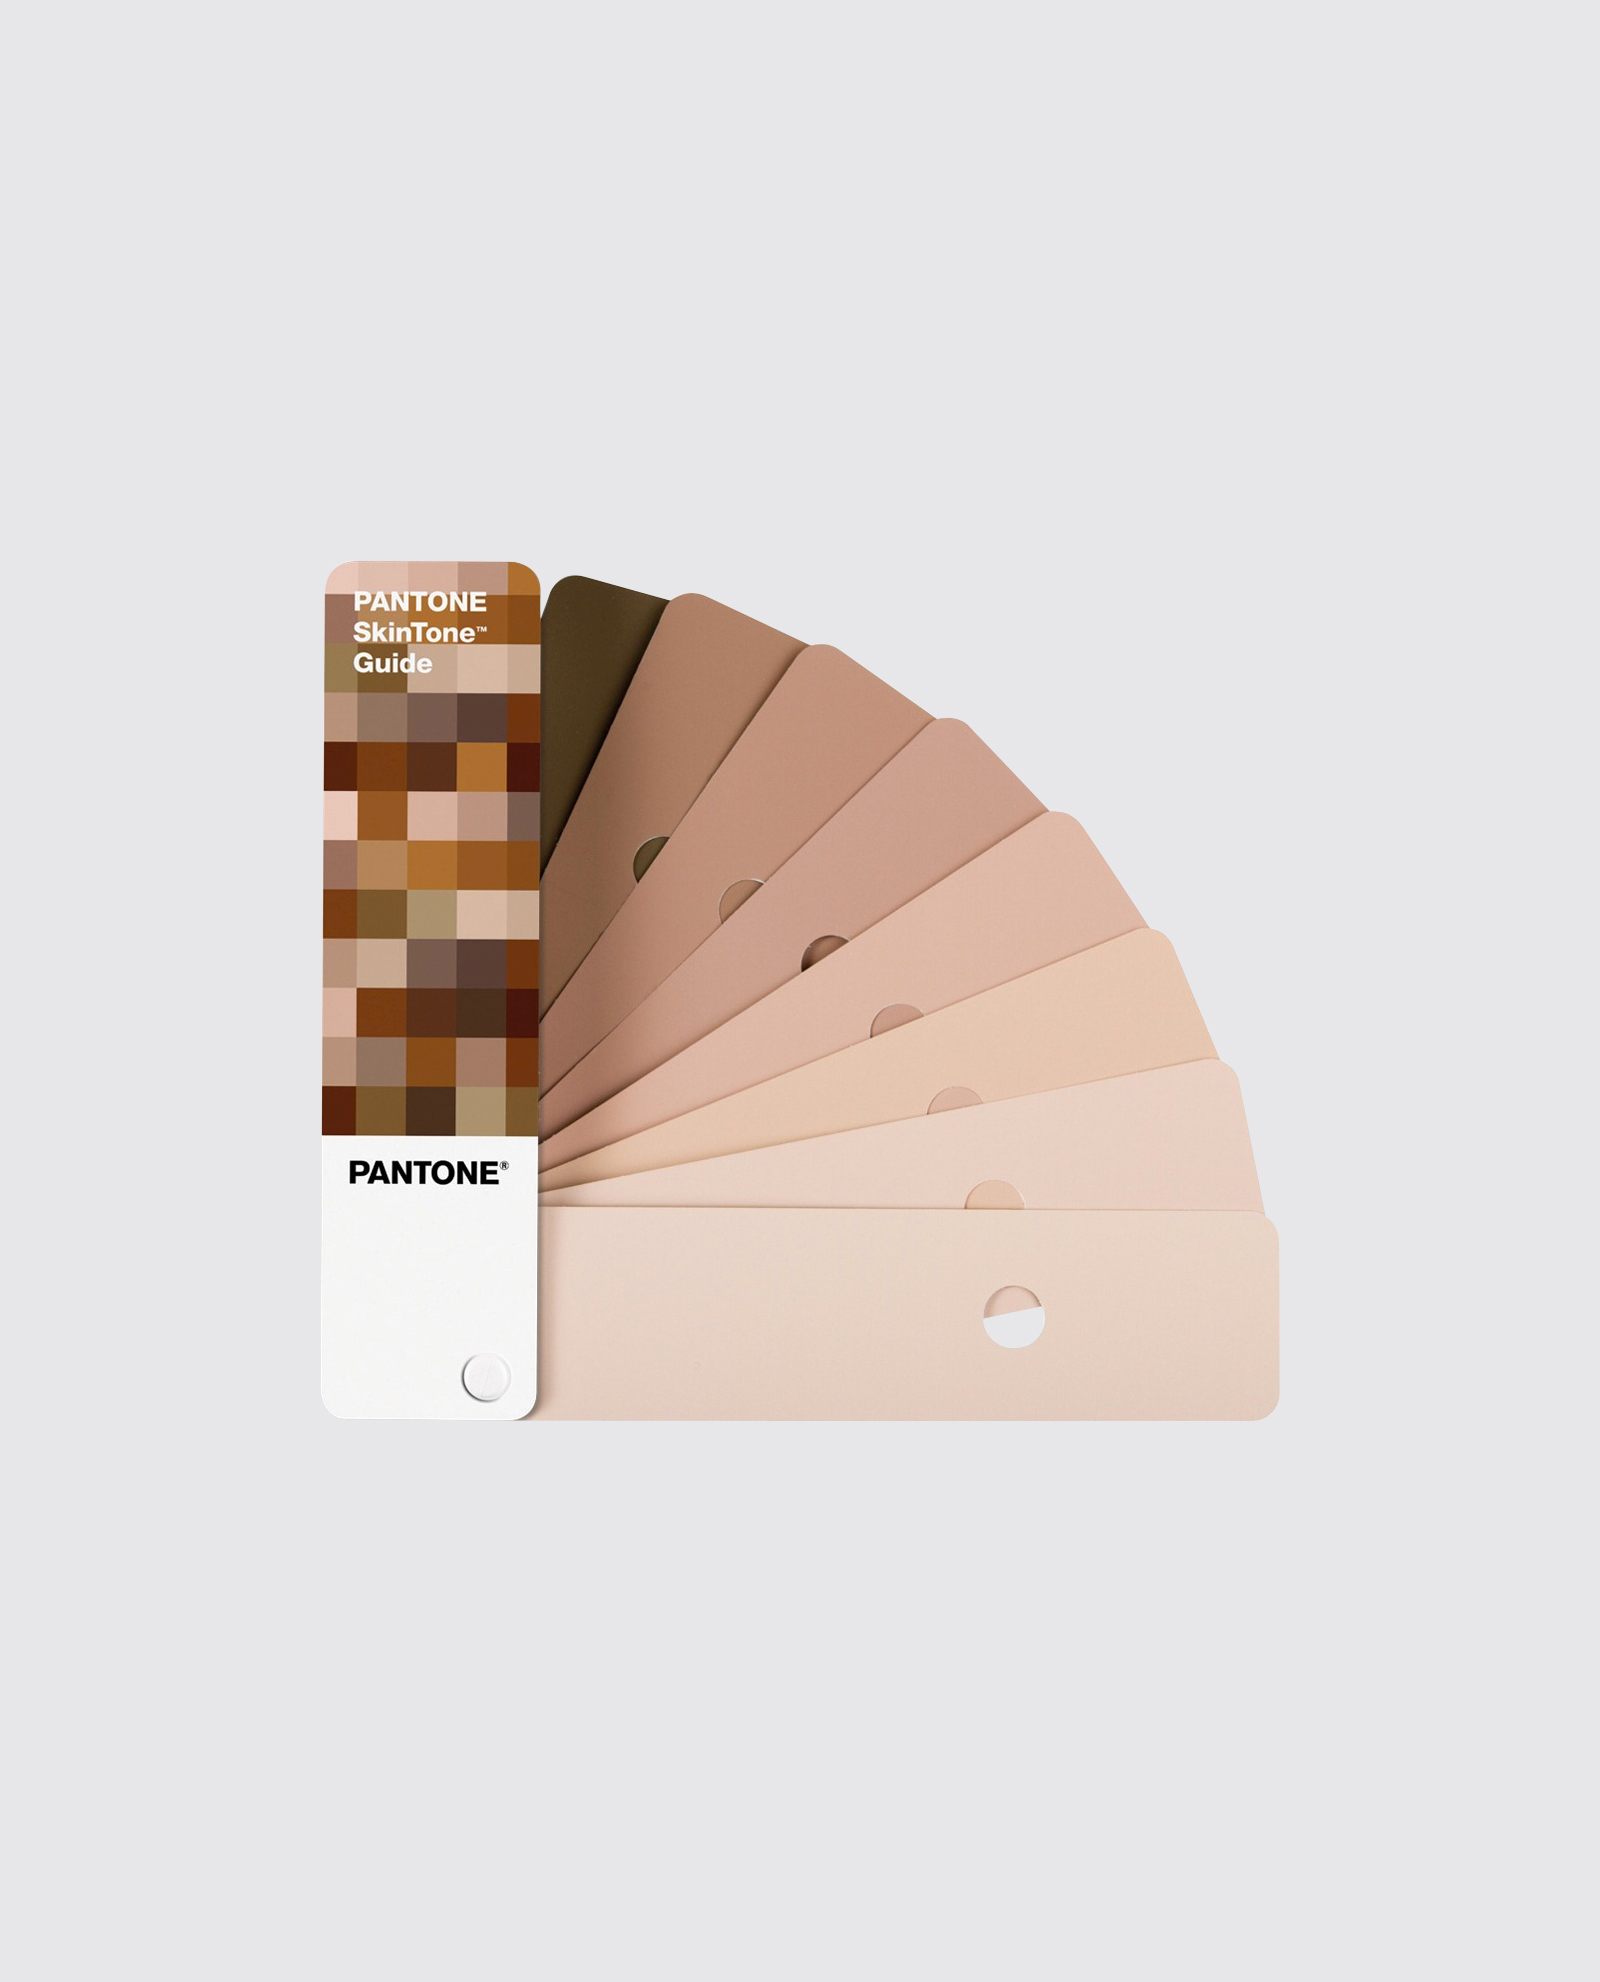 pantone color manager software serial number